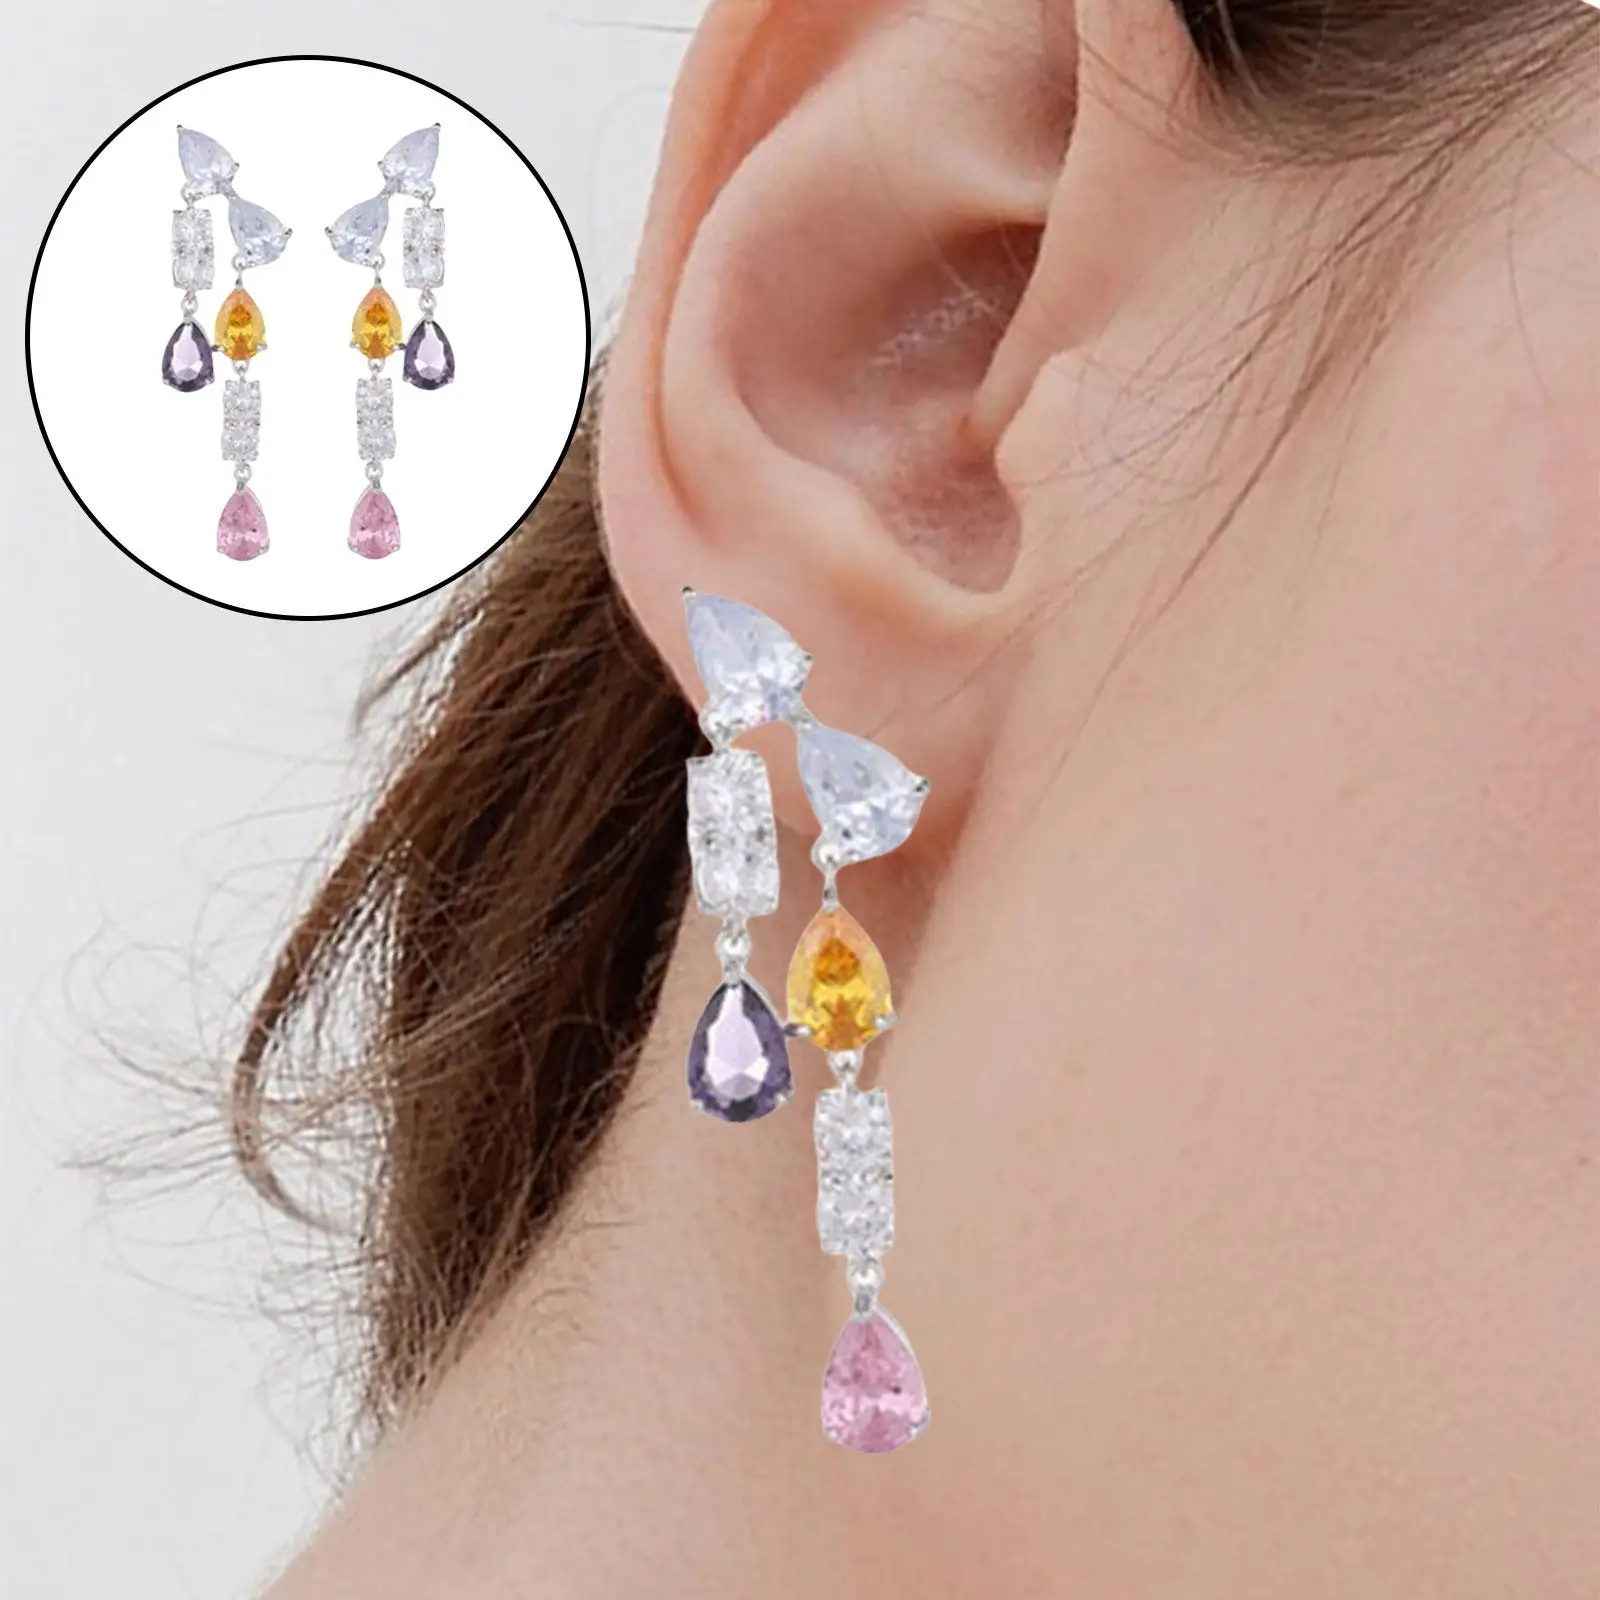 2 Pieces Colorful Dangle Earrings Lightweight Clothing Accessories Lady Shiny for Beach Graduation